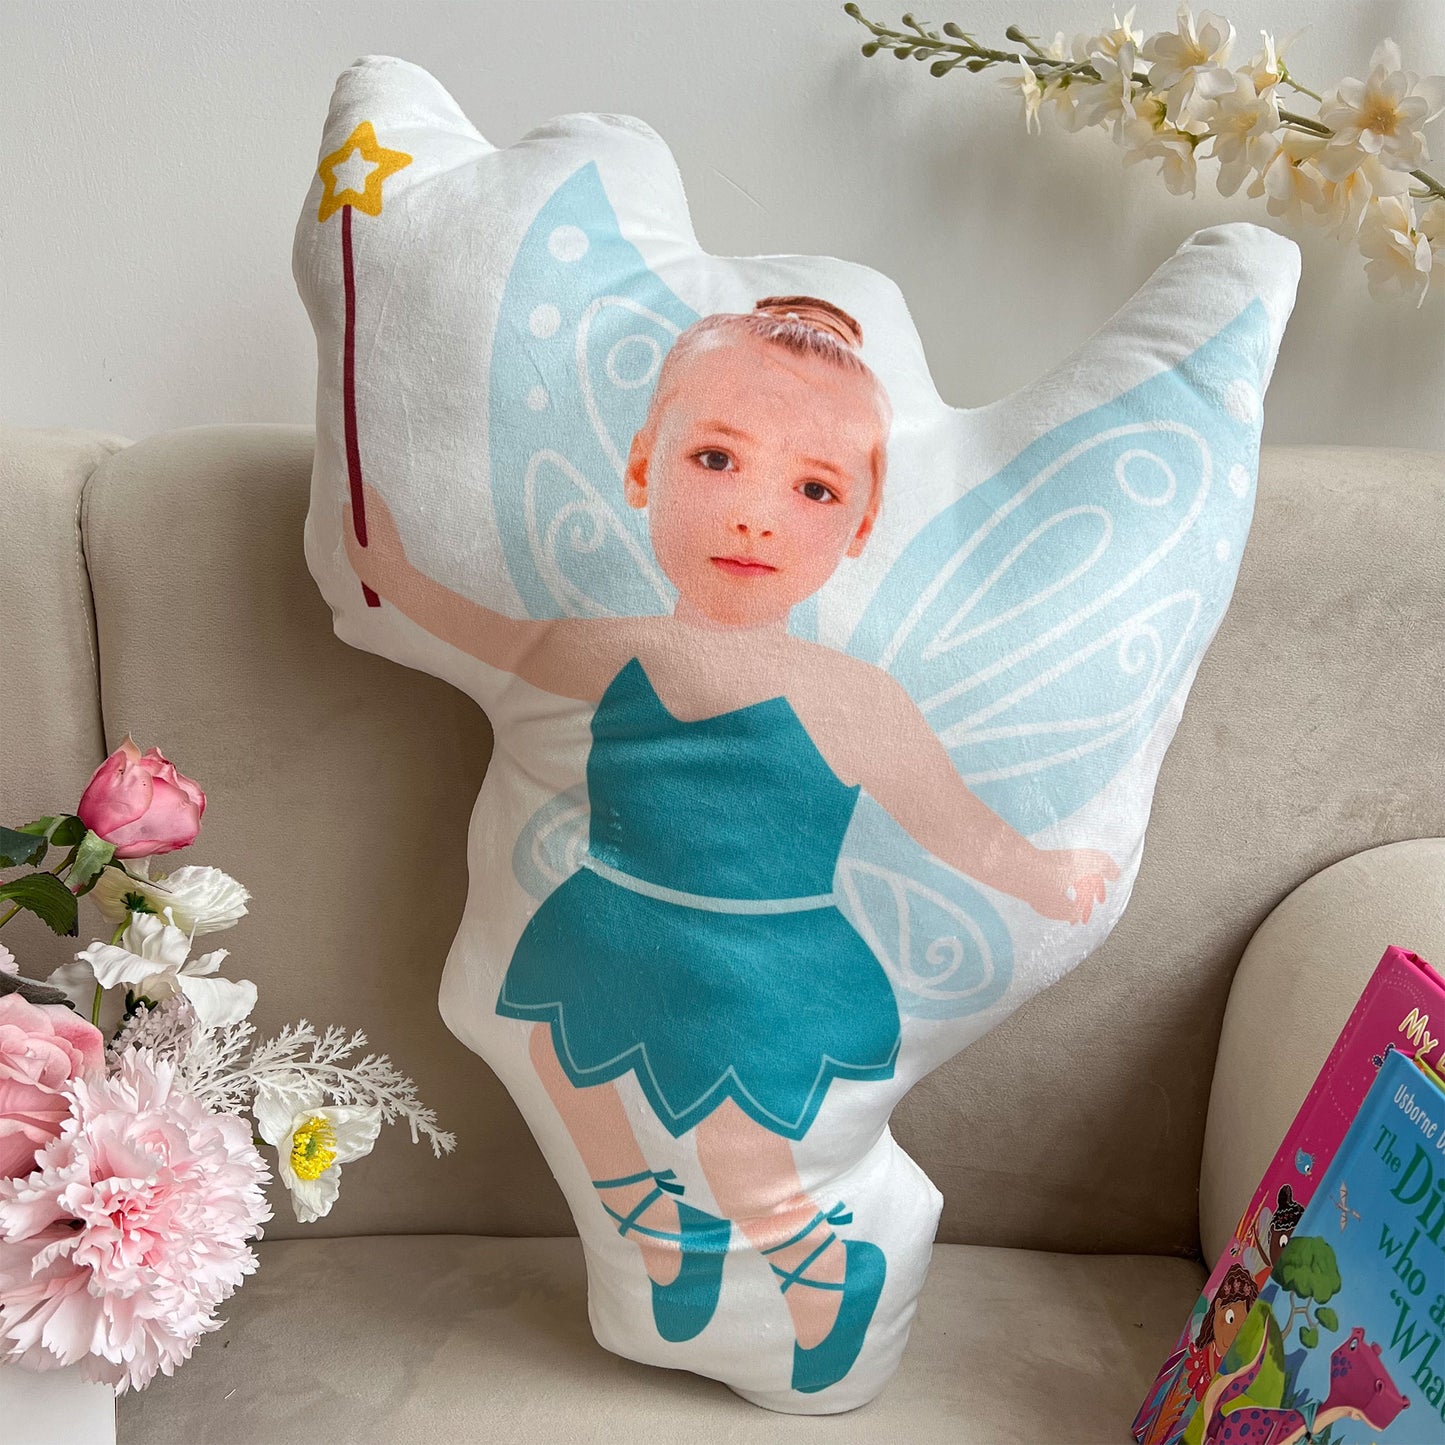 Little Kid Wearing Fairy Costume - Personalized Photo Custom Shaped Pillow